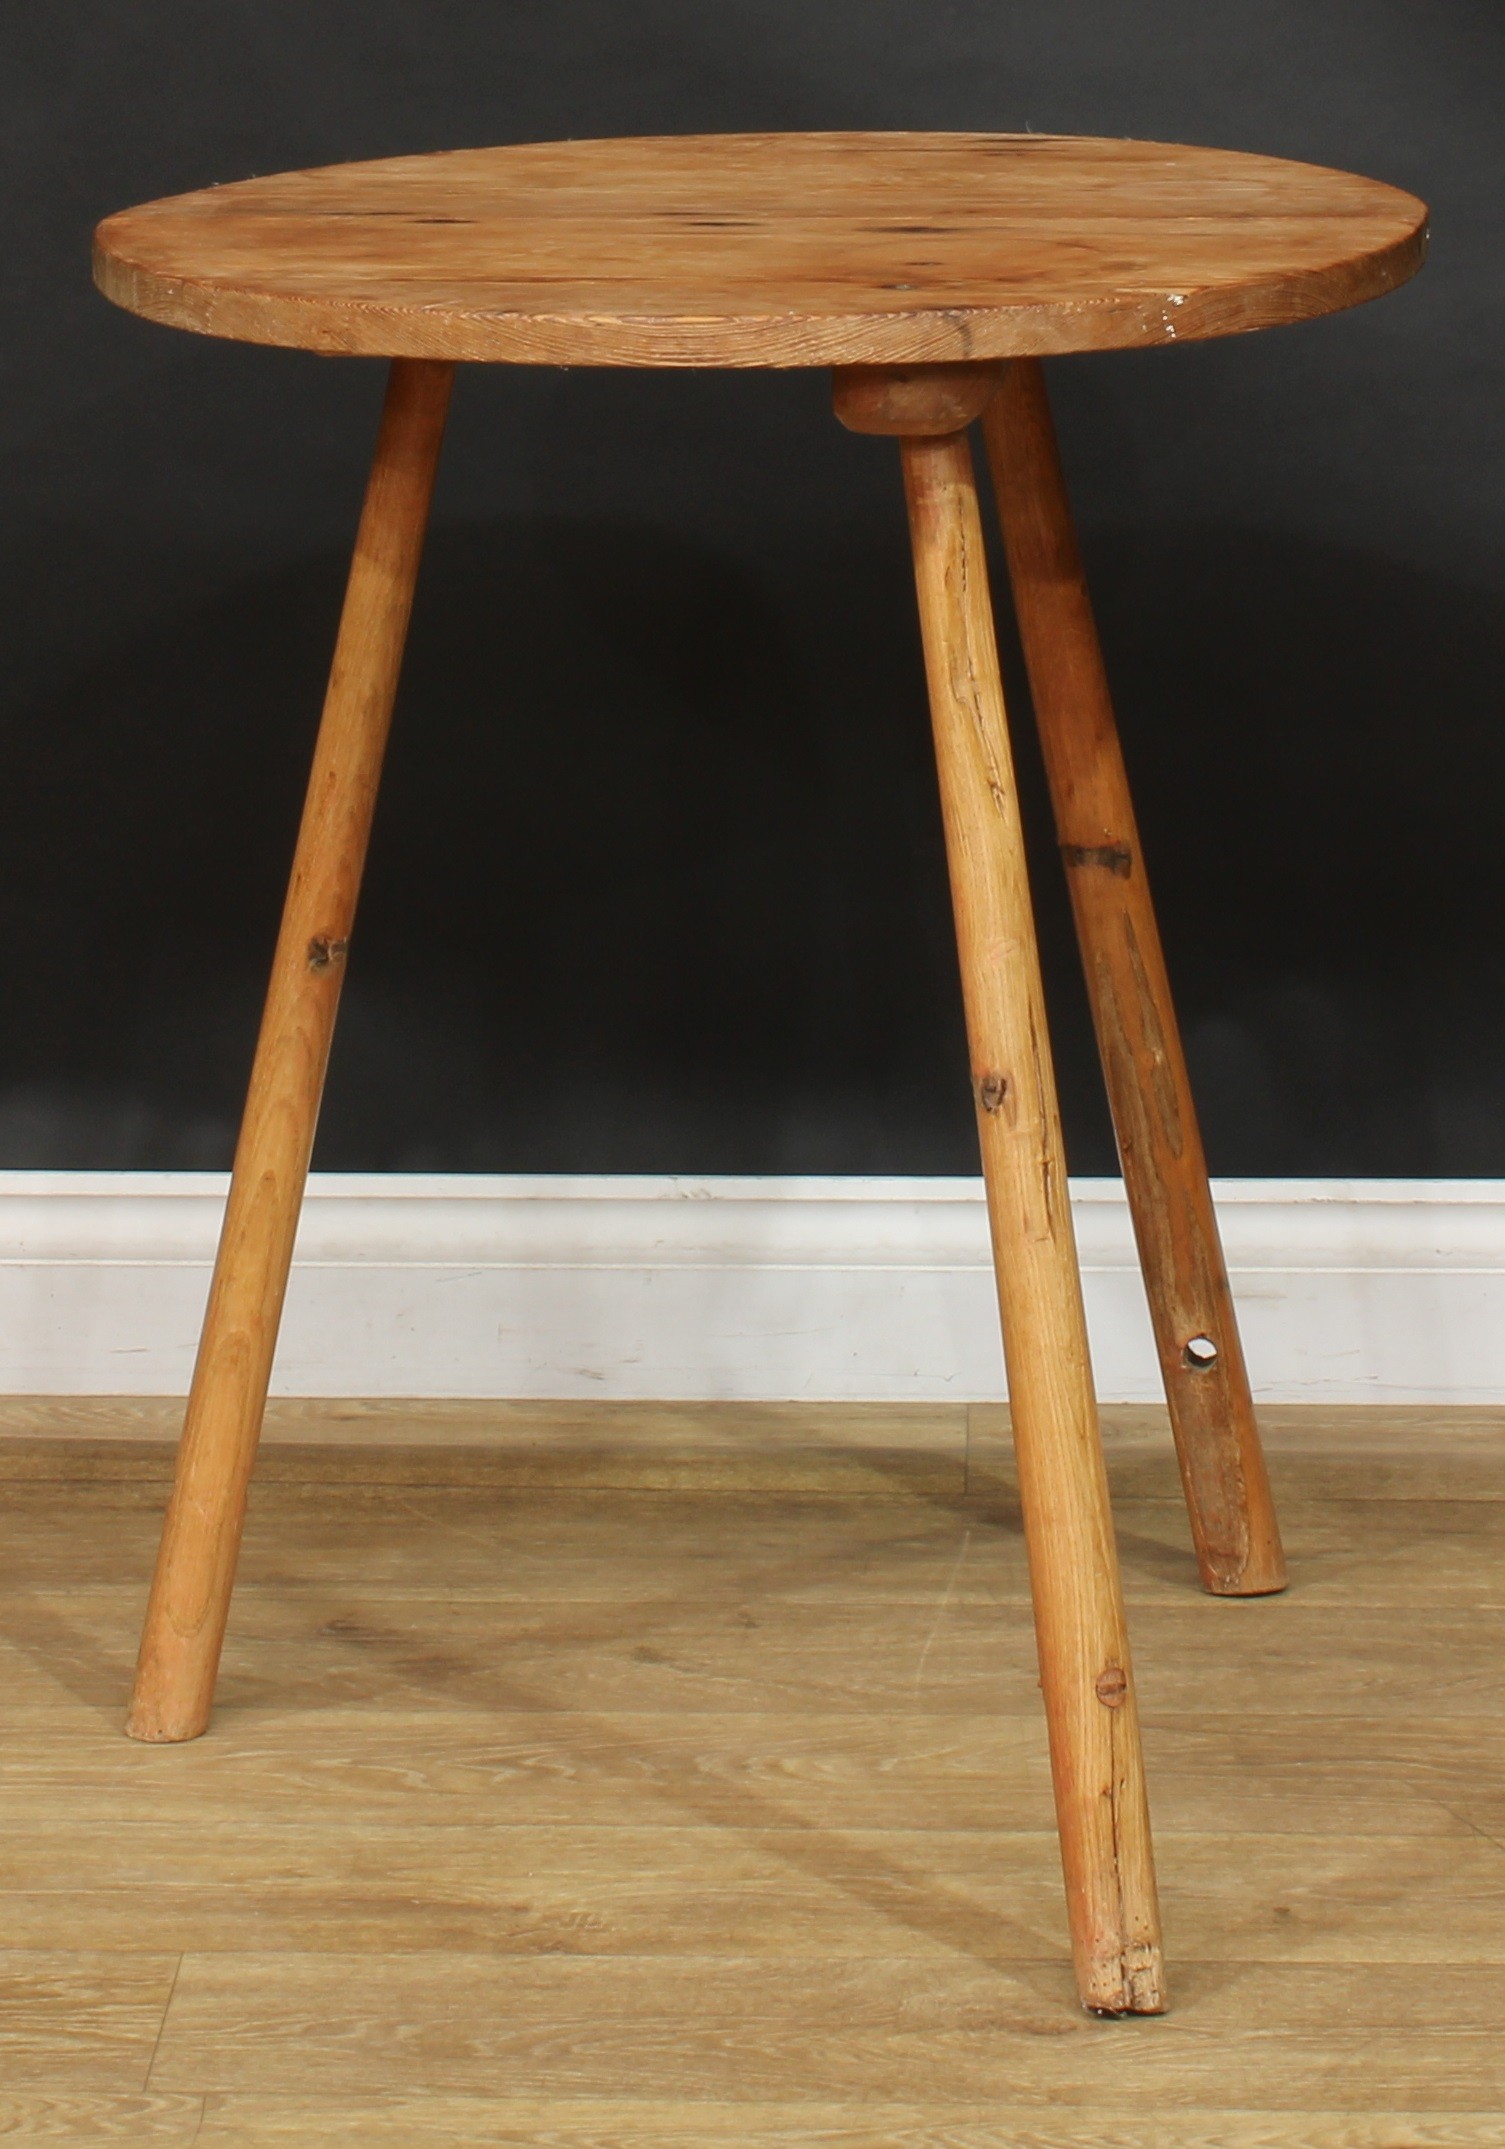 A 19th century pine and ash cricket table, circular top, 73cm high, 61cm diameter - Image 4 of 4